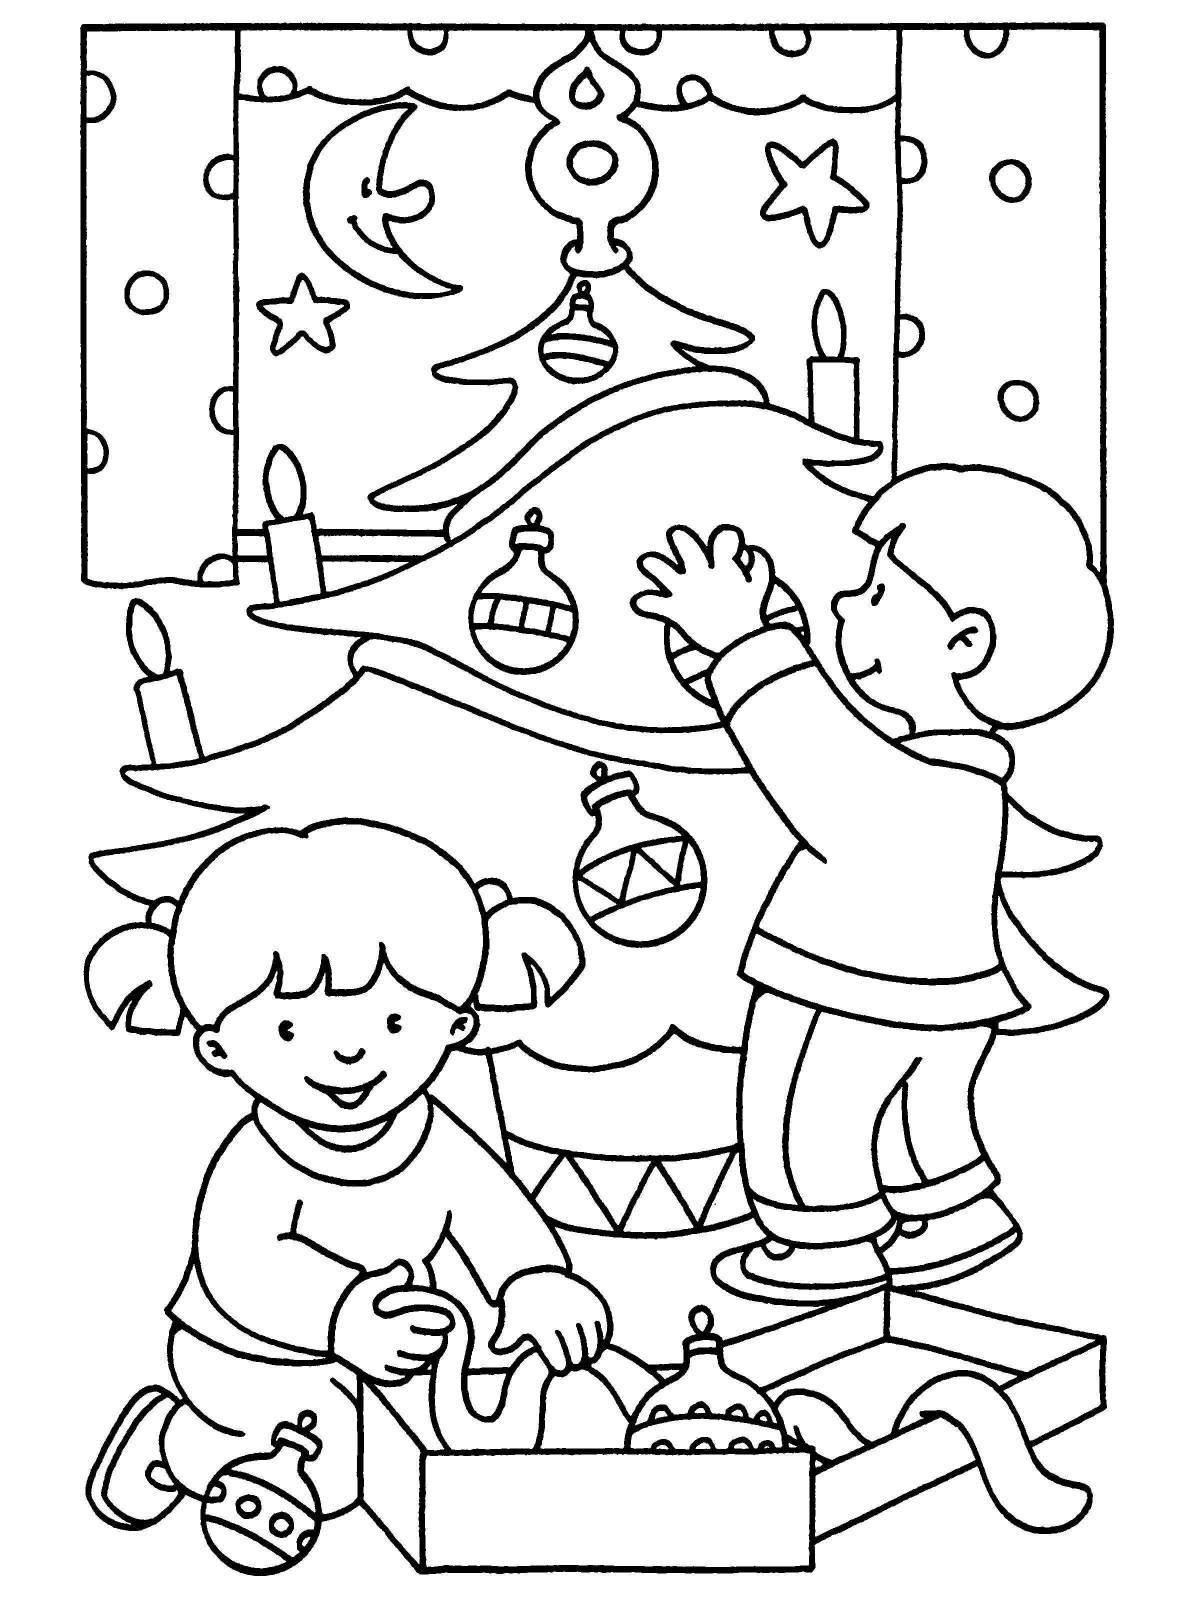 Amazing Christmas coloring book for 3-4 year olds